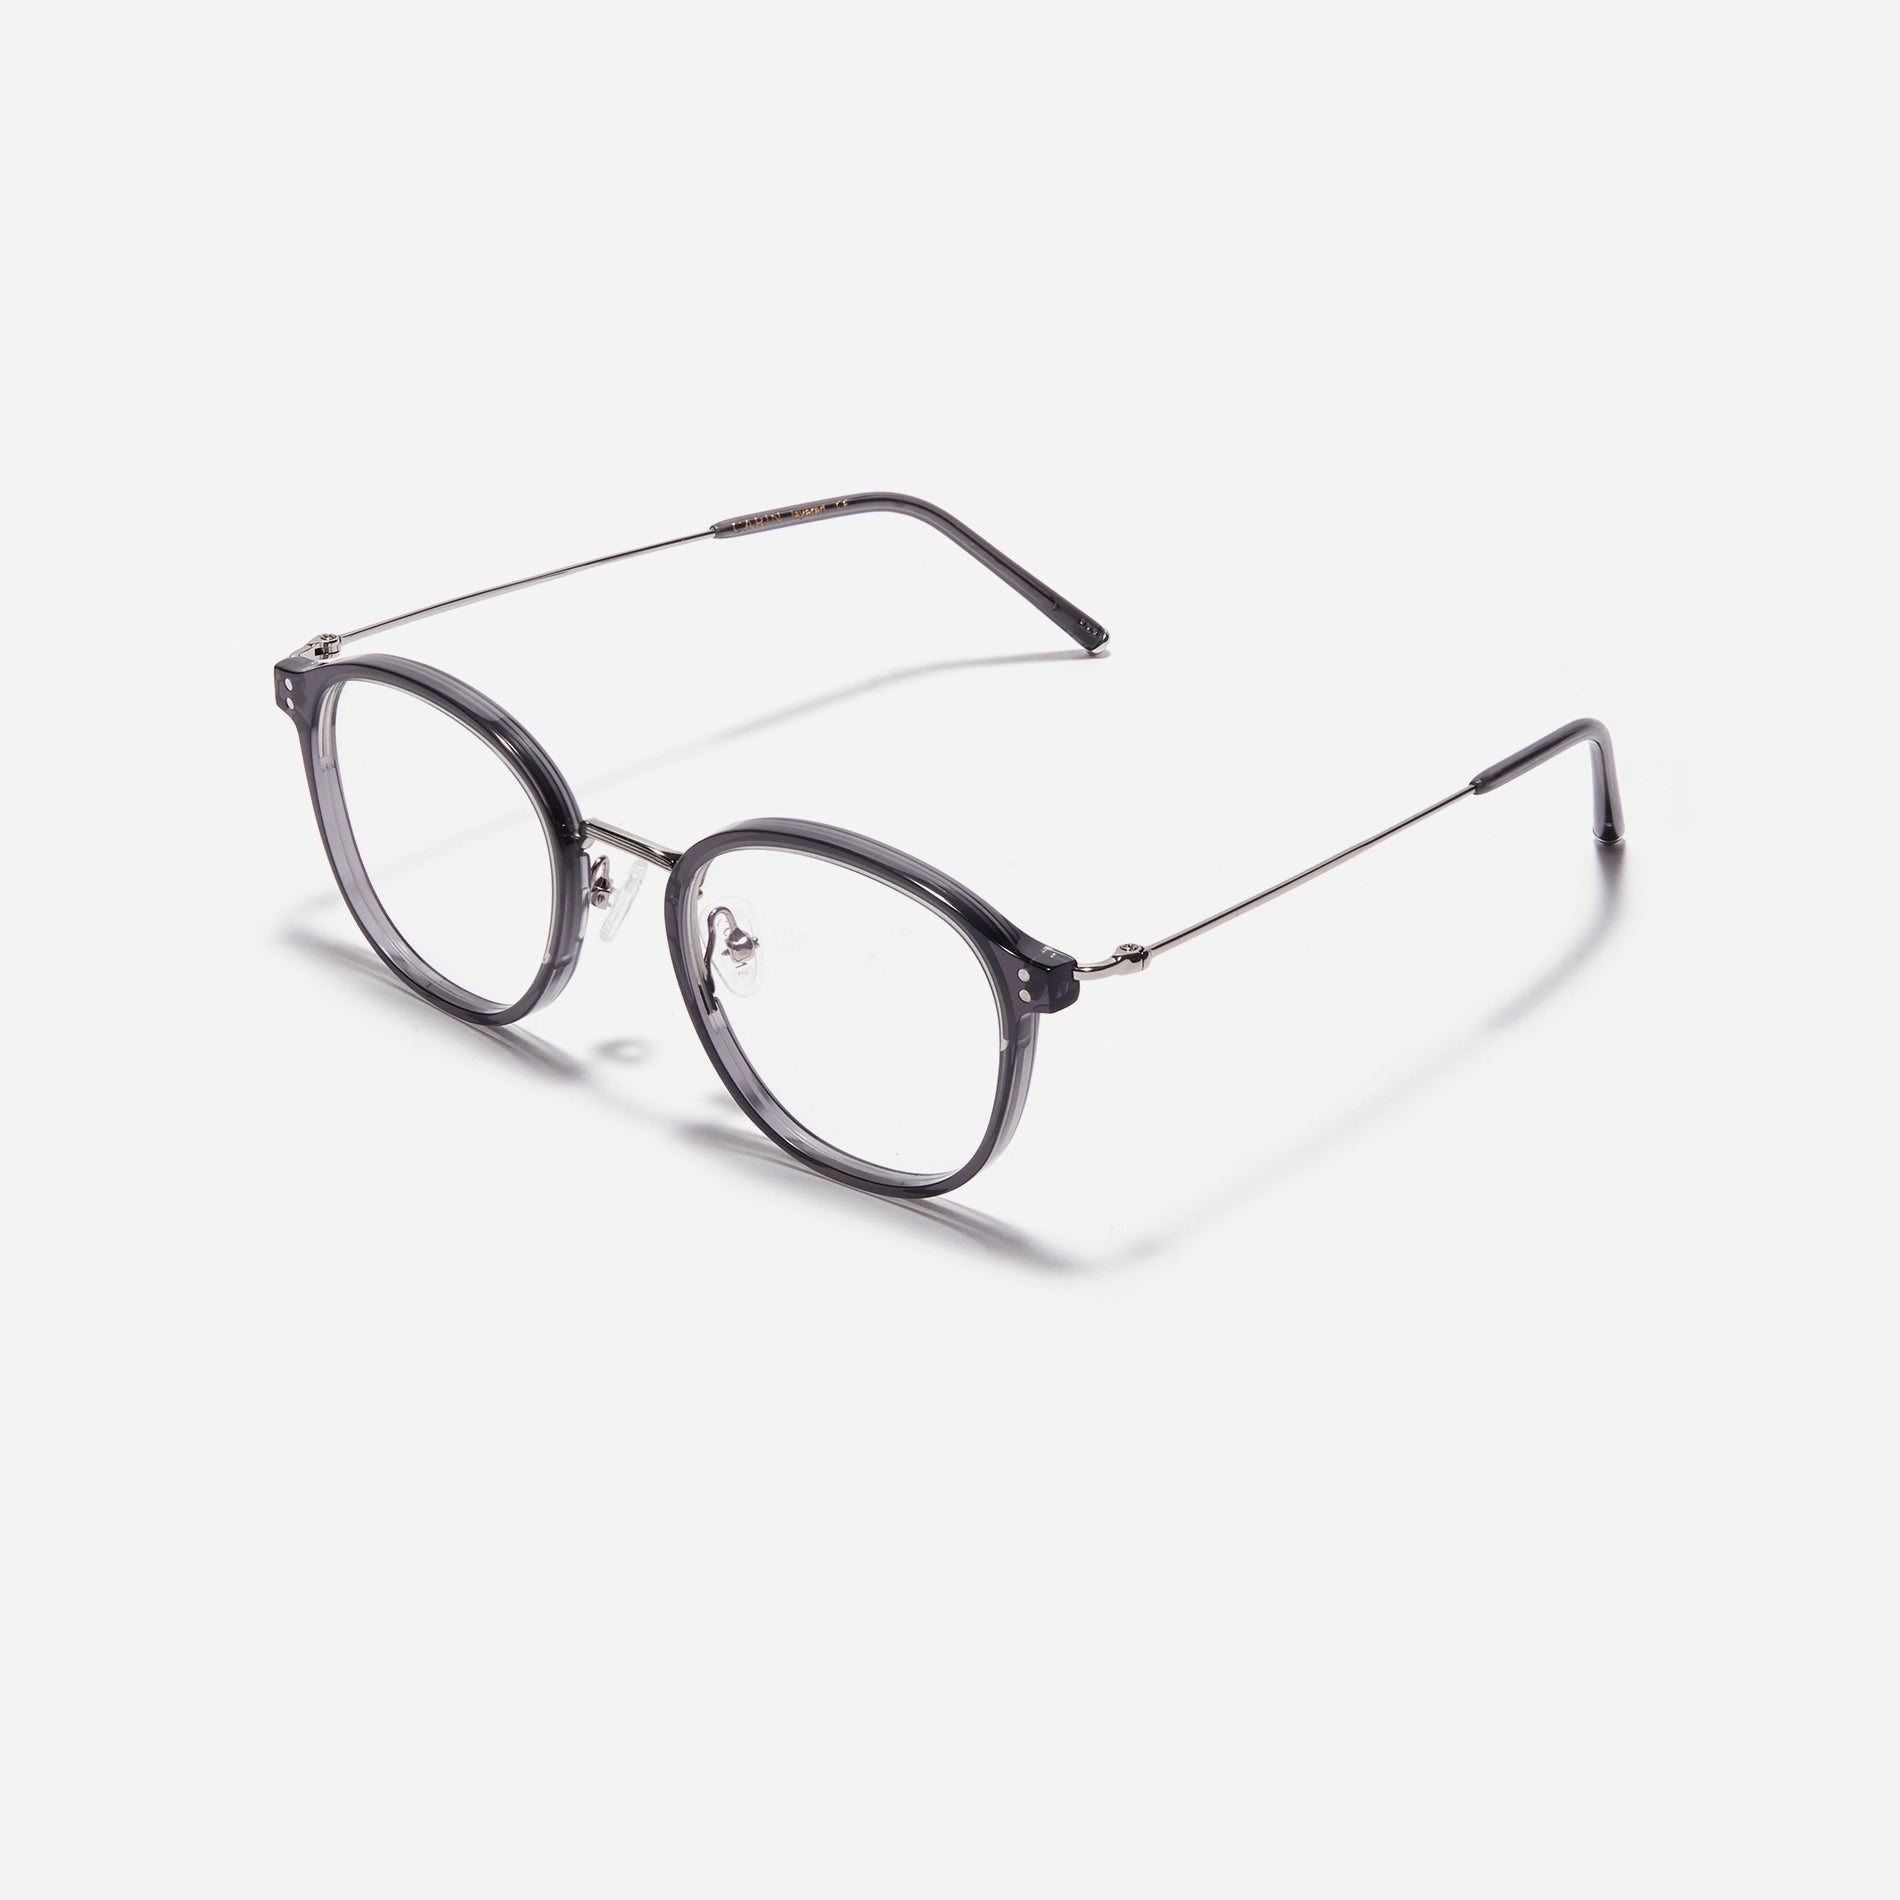 Square-shaped eyeglasses with a dual-combi structure inspired by from the aesthetics of platform shoes. Their dual-rim structure seamlessly accommodates thick lenses for higher prescriptions, while retro vibes are accentuated by side color accents applied using epoxy techniques.